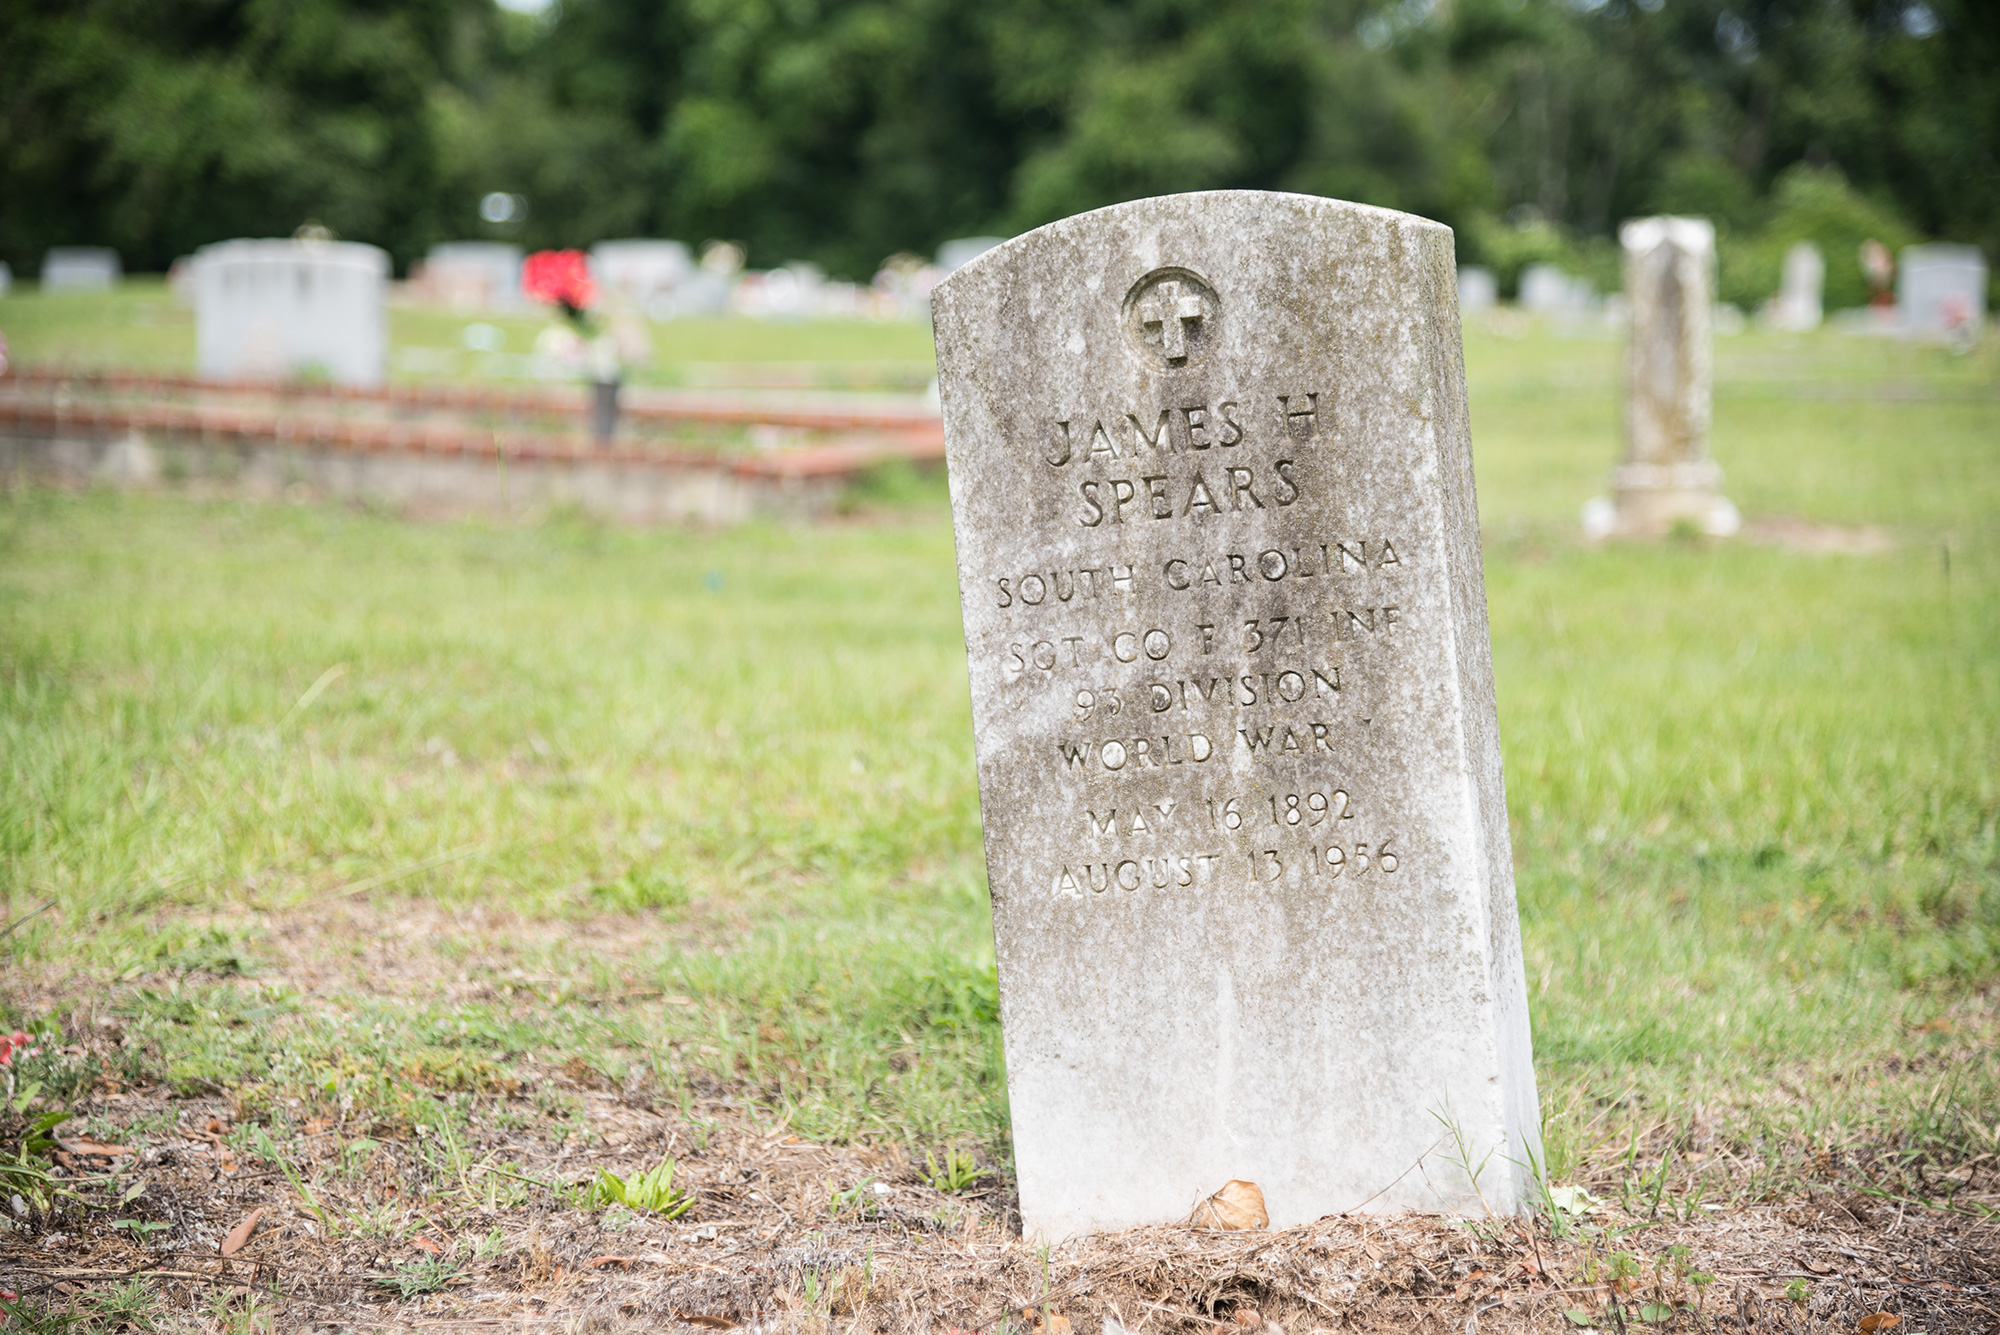 Sgt. James H. Spears headstone, Union Cemetery in Florence, SC